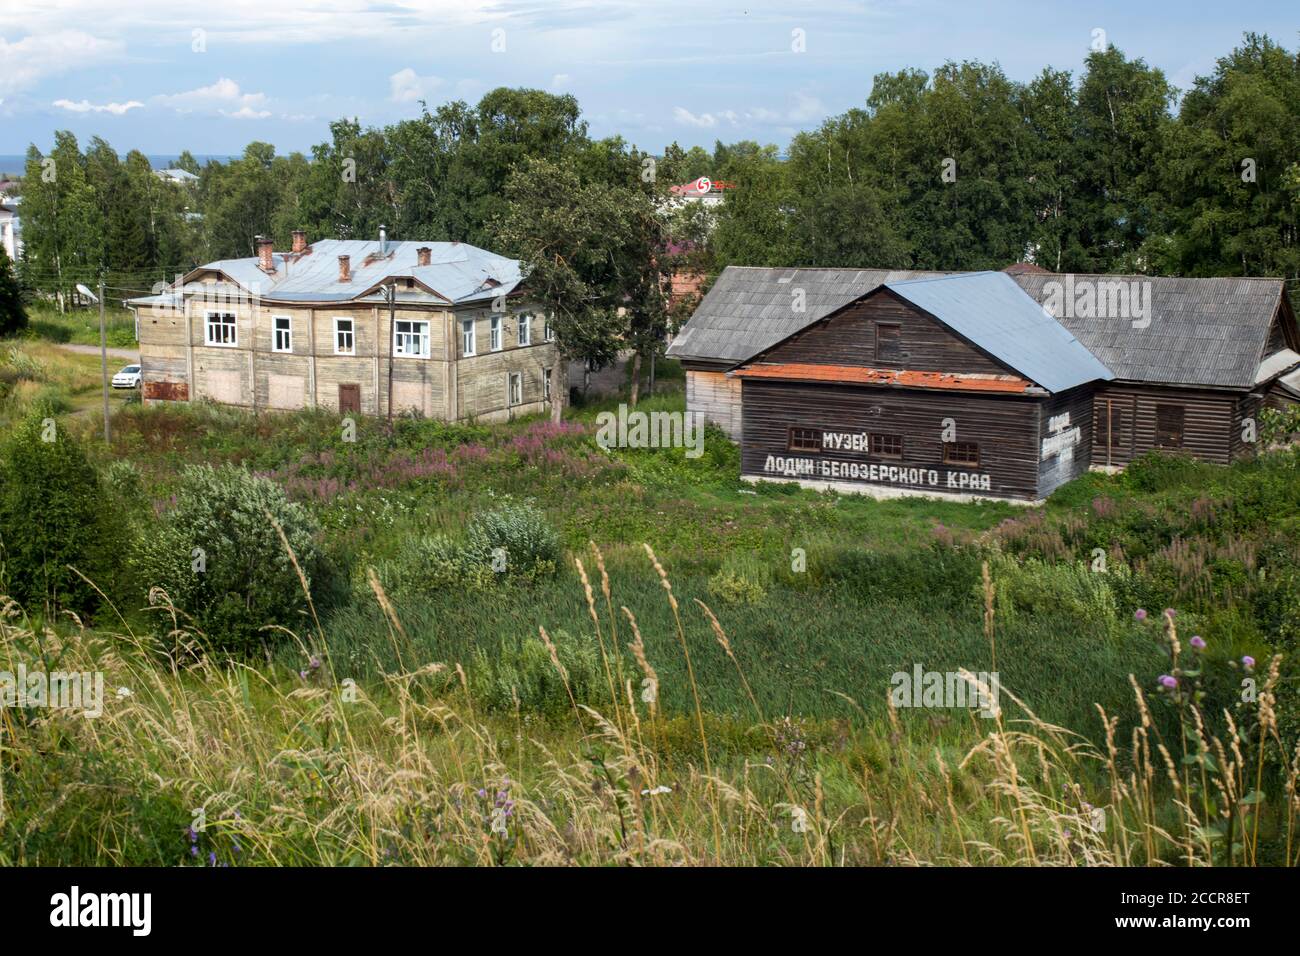 BELOZERSK, RUSSIA - 03 August 2020, landscape with the image of old russian north town Belozersk Stock Photo